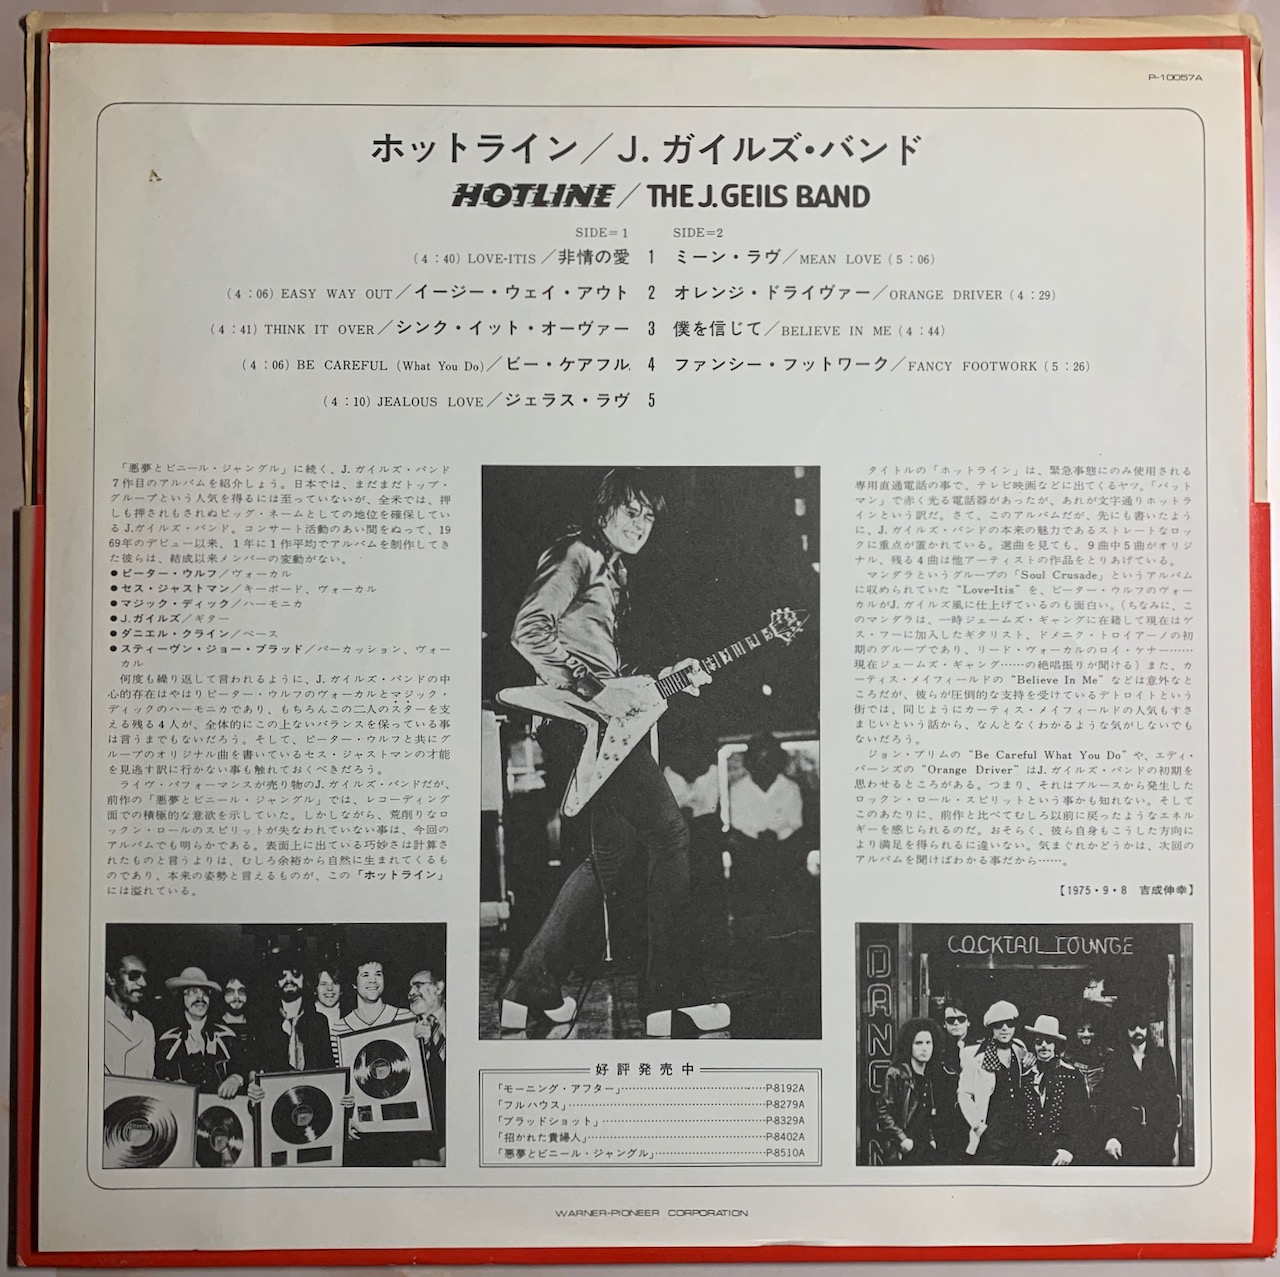 Memorabilia The J Geils Band 1975 Hotline Promo Lp From Japan Promo Inserts The J Geils Band Net